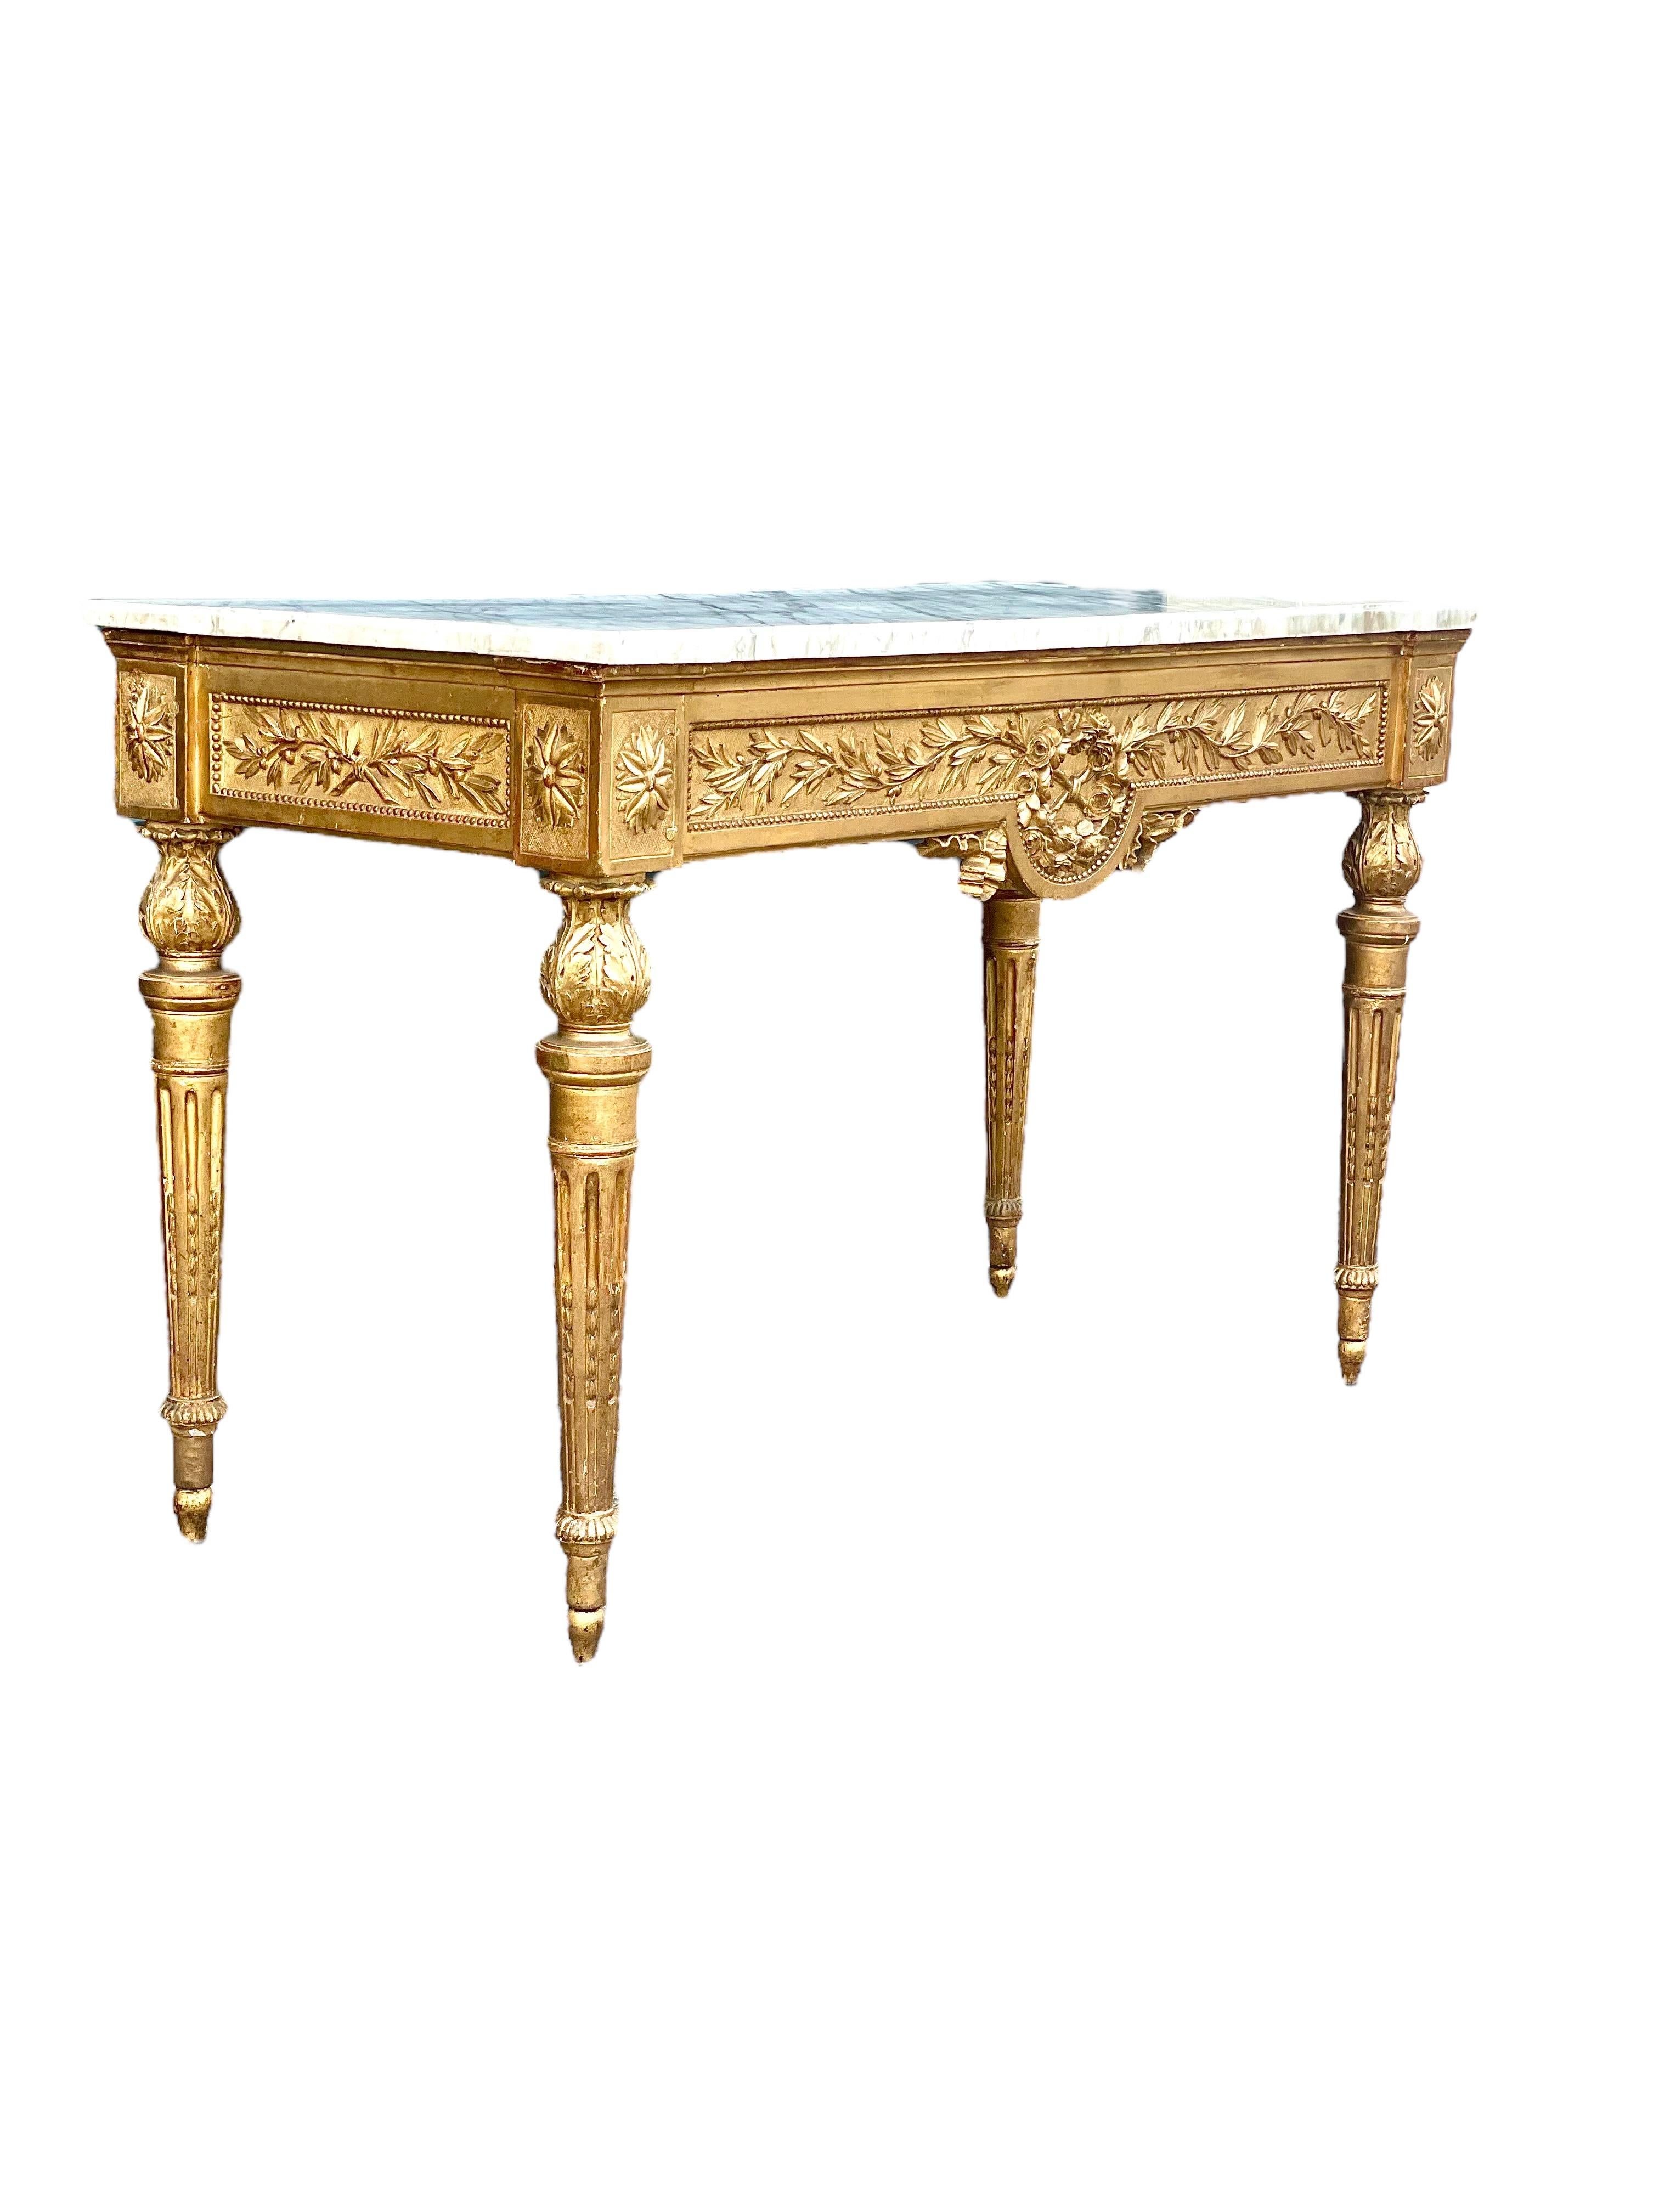 An opulent French Louis XVI period carved giltwood console table with its original marble top and dating from the 18th century. Rectangular in shape, this elegant neoclassical table is elaborately carved and decorated, its belt emblazoned on three